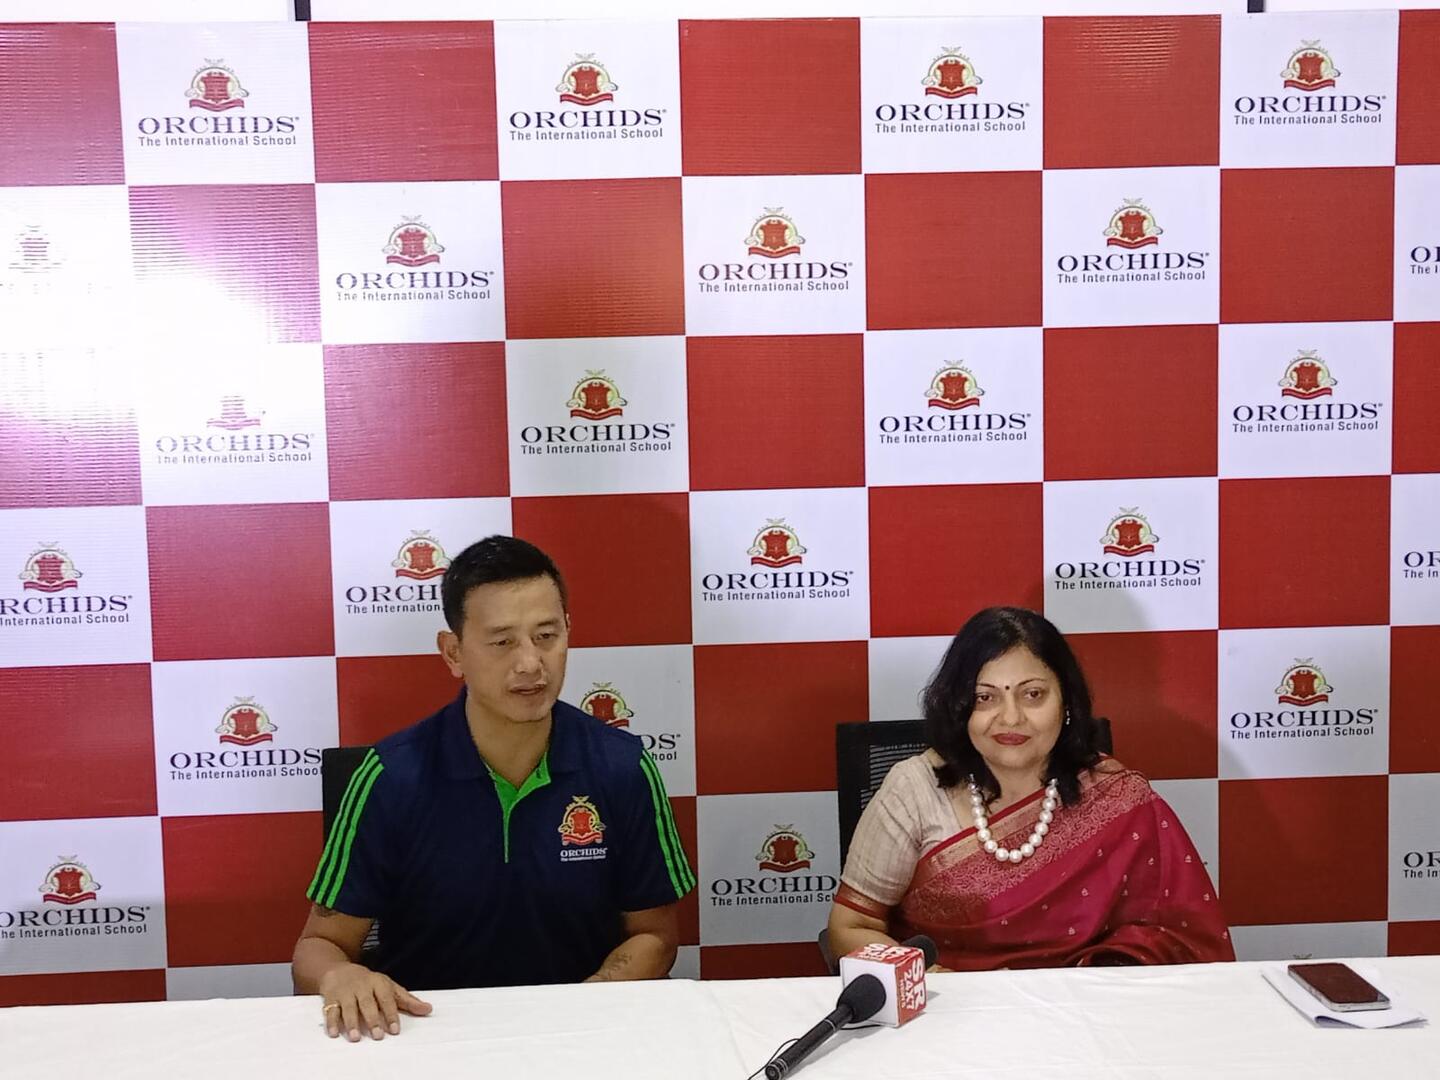 Orchids The International School conducts an exclusive Masterclass for students with renowned Indian Footballer Bhaichung Bhutia